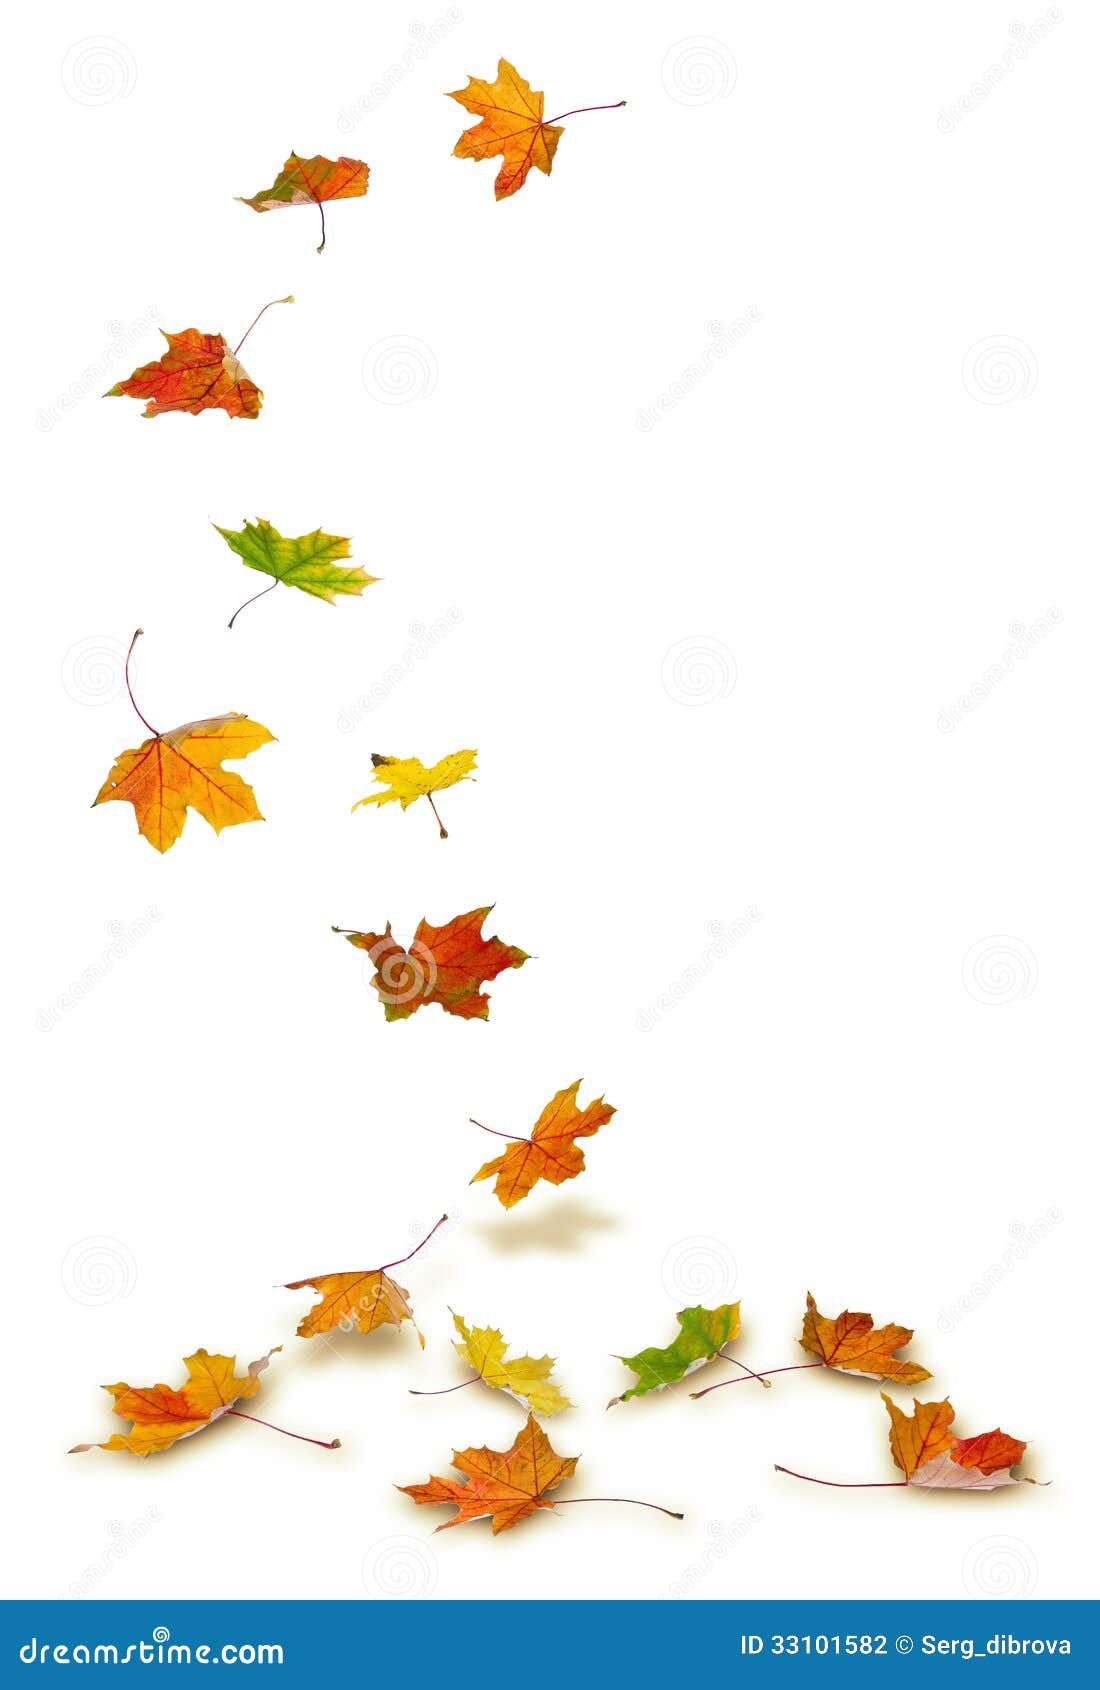 clip art leaves blowing - photo #45